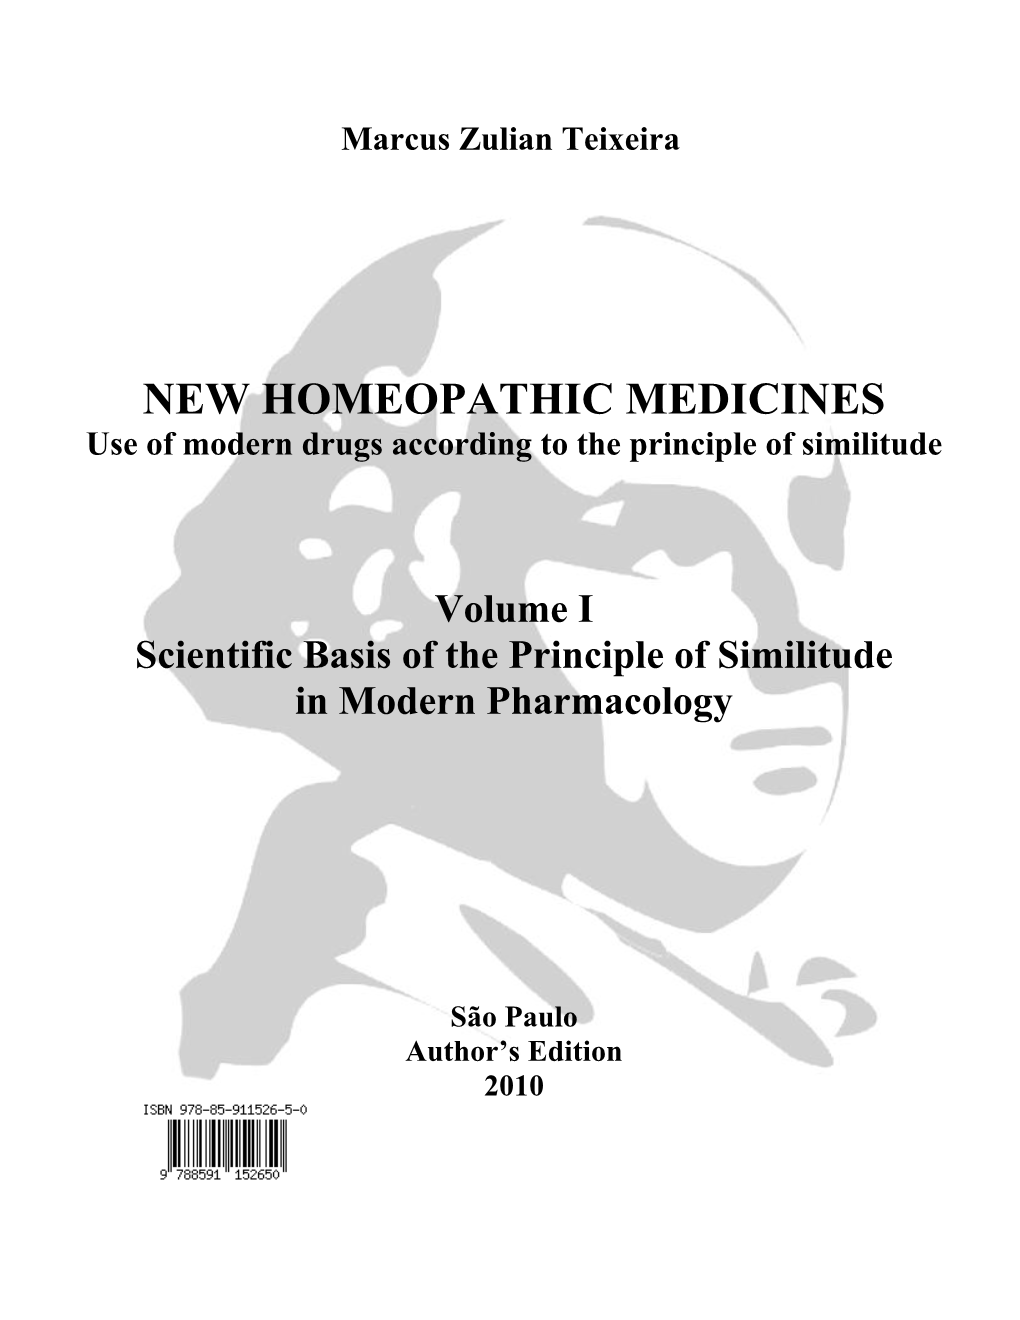 NEW HOMEOPATHIC MEDICINES Use of Modern Drugs According to the Principle of Similitude